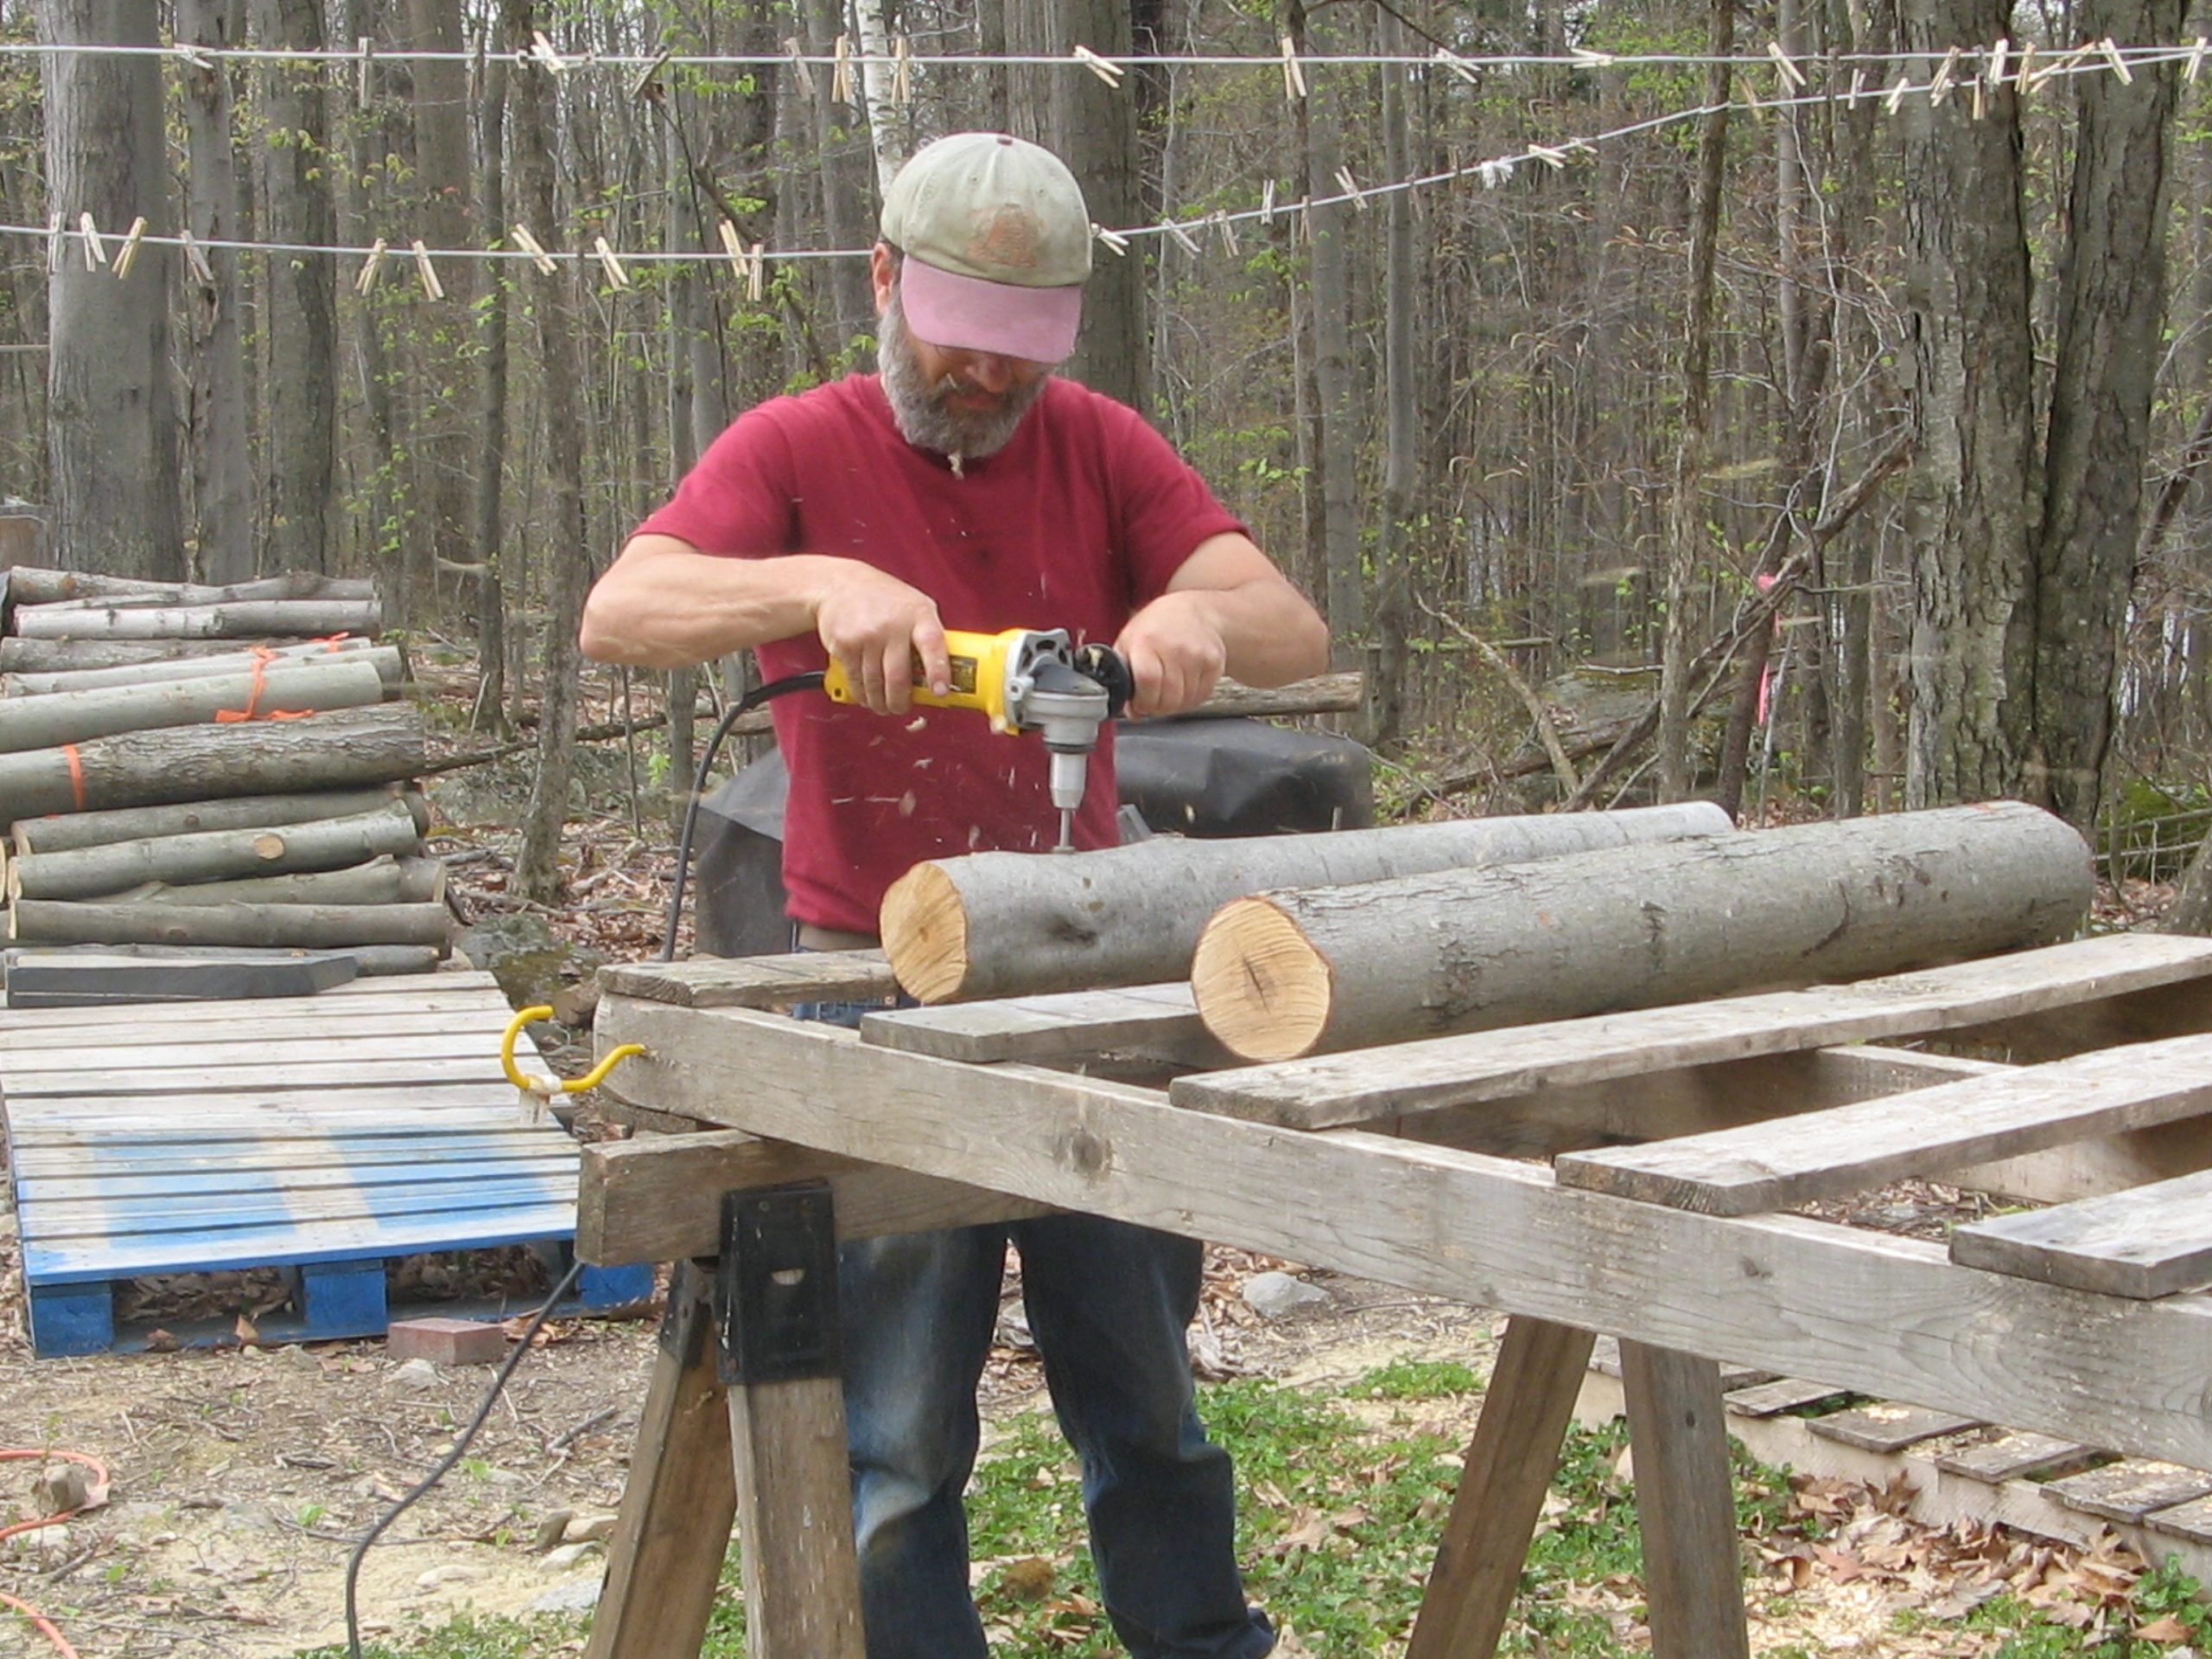 A man drills into a log on a homemade inoculation table